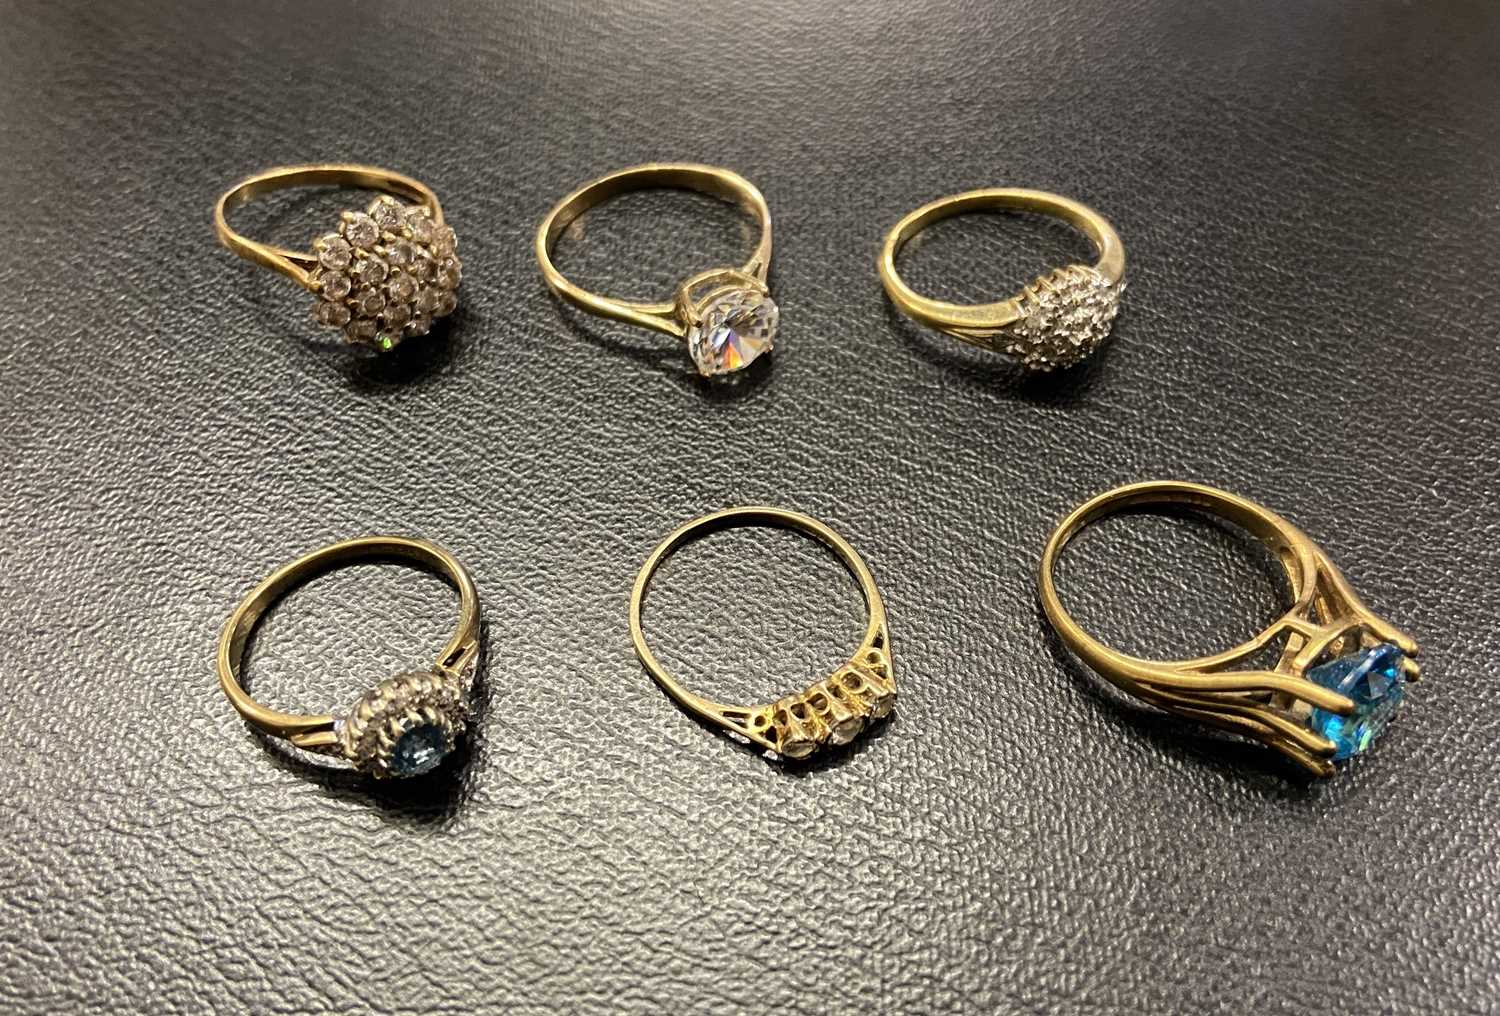 Rings. A collection of dress rings